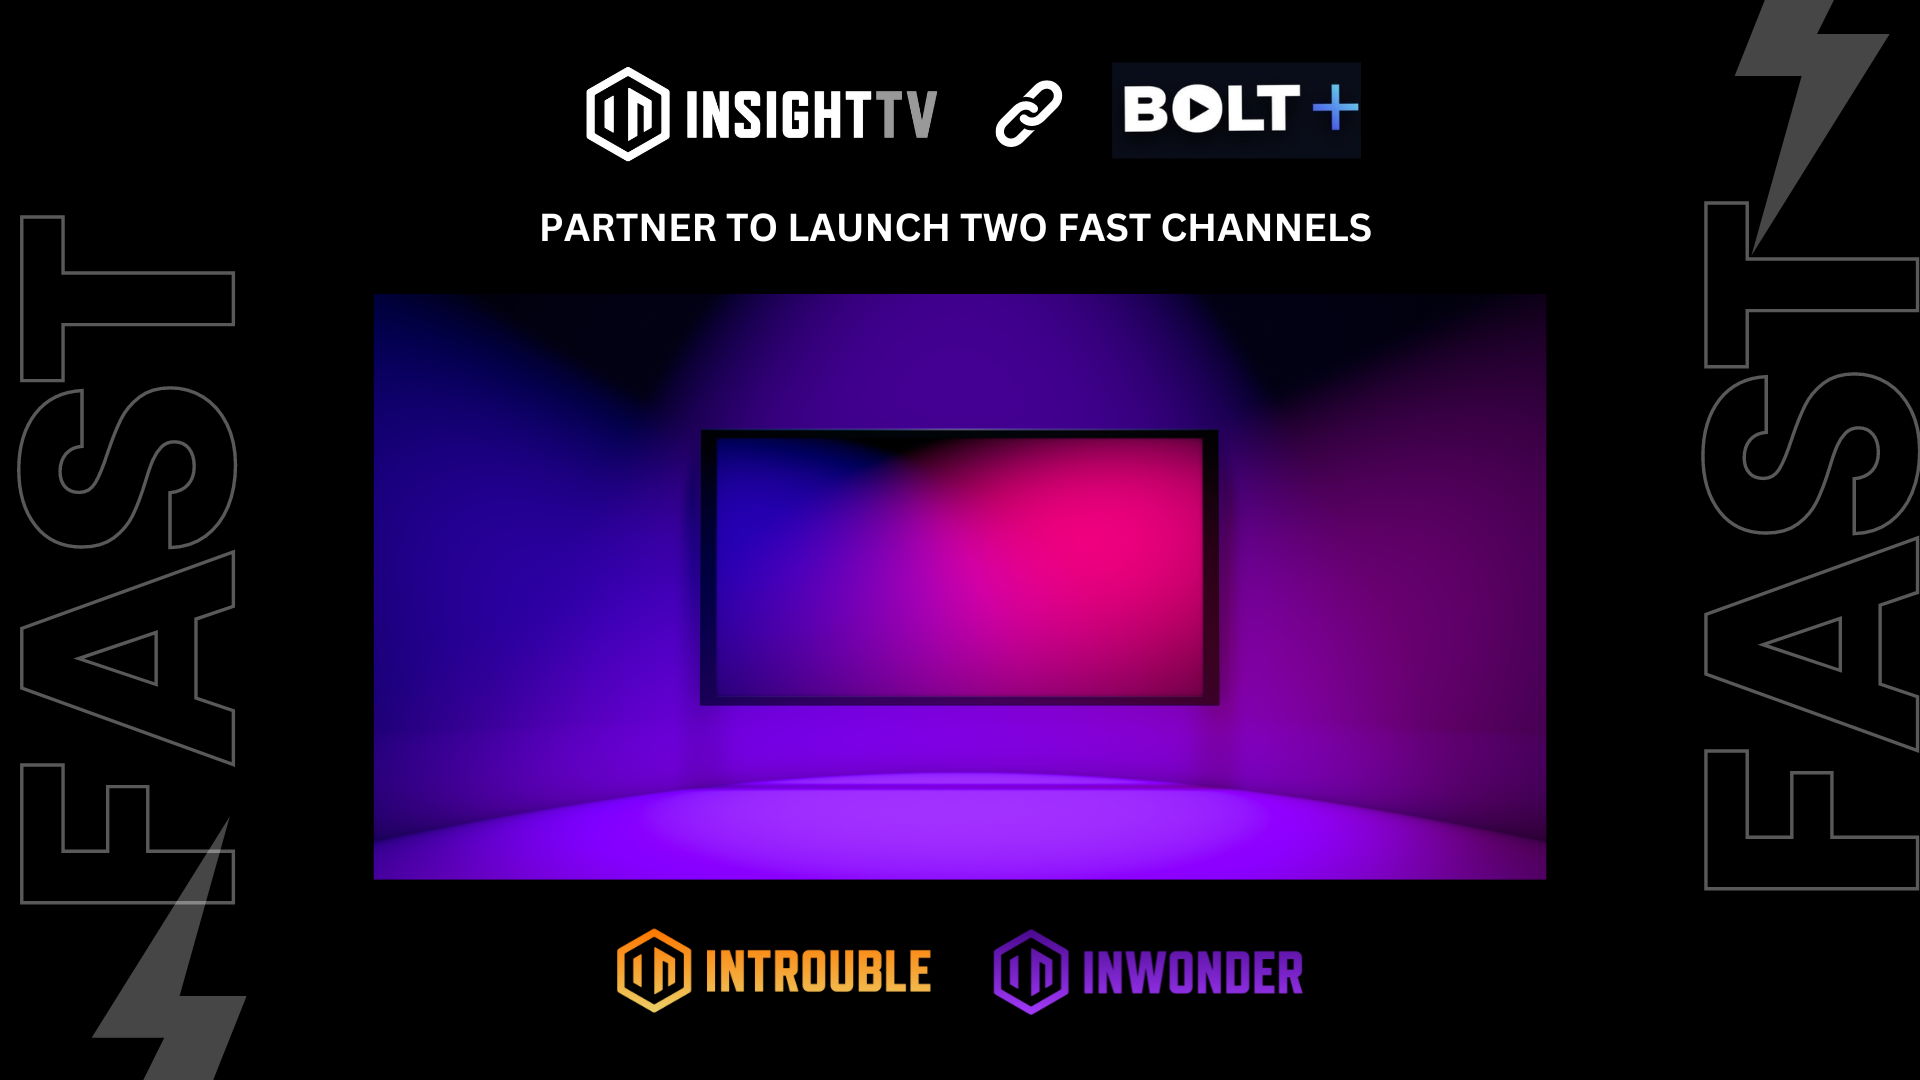 INSIGHT TV and Bolt+ Forge Partnership for two FAST channels